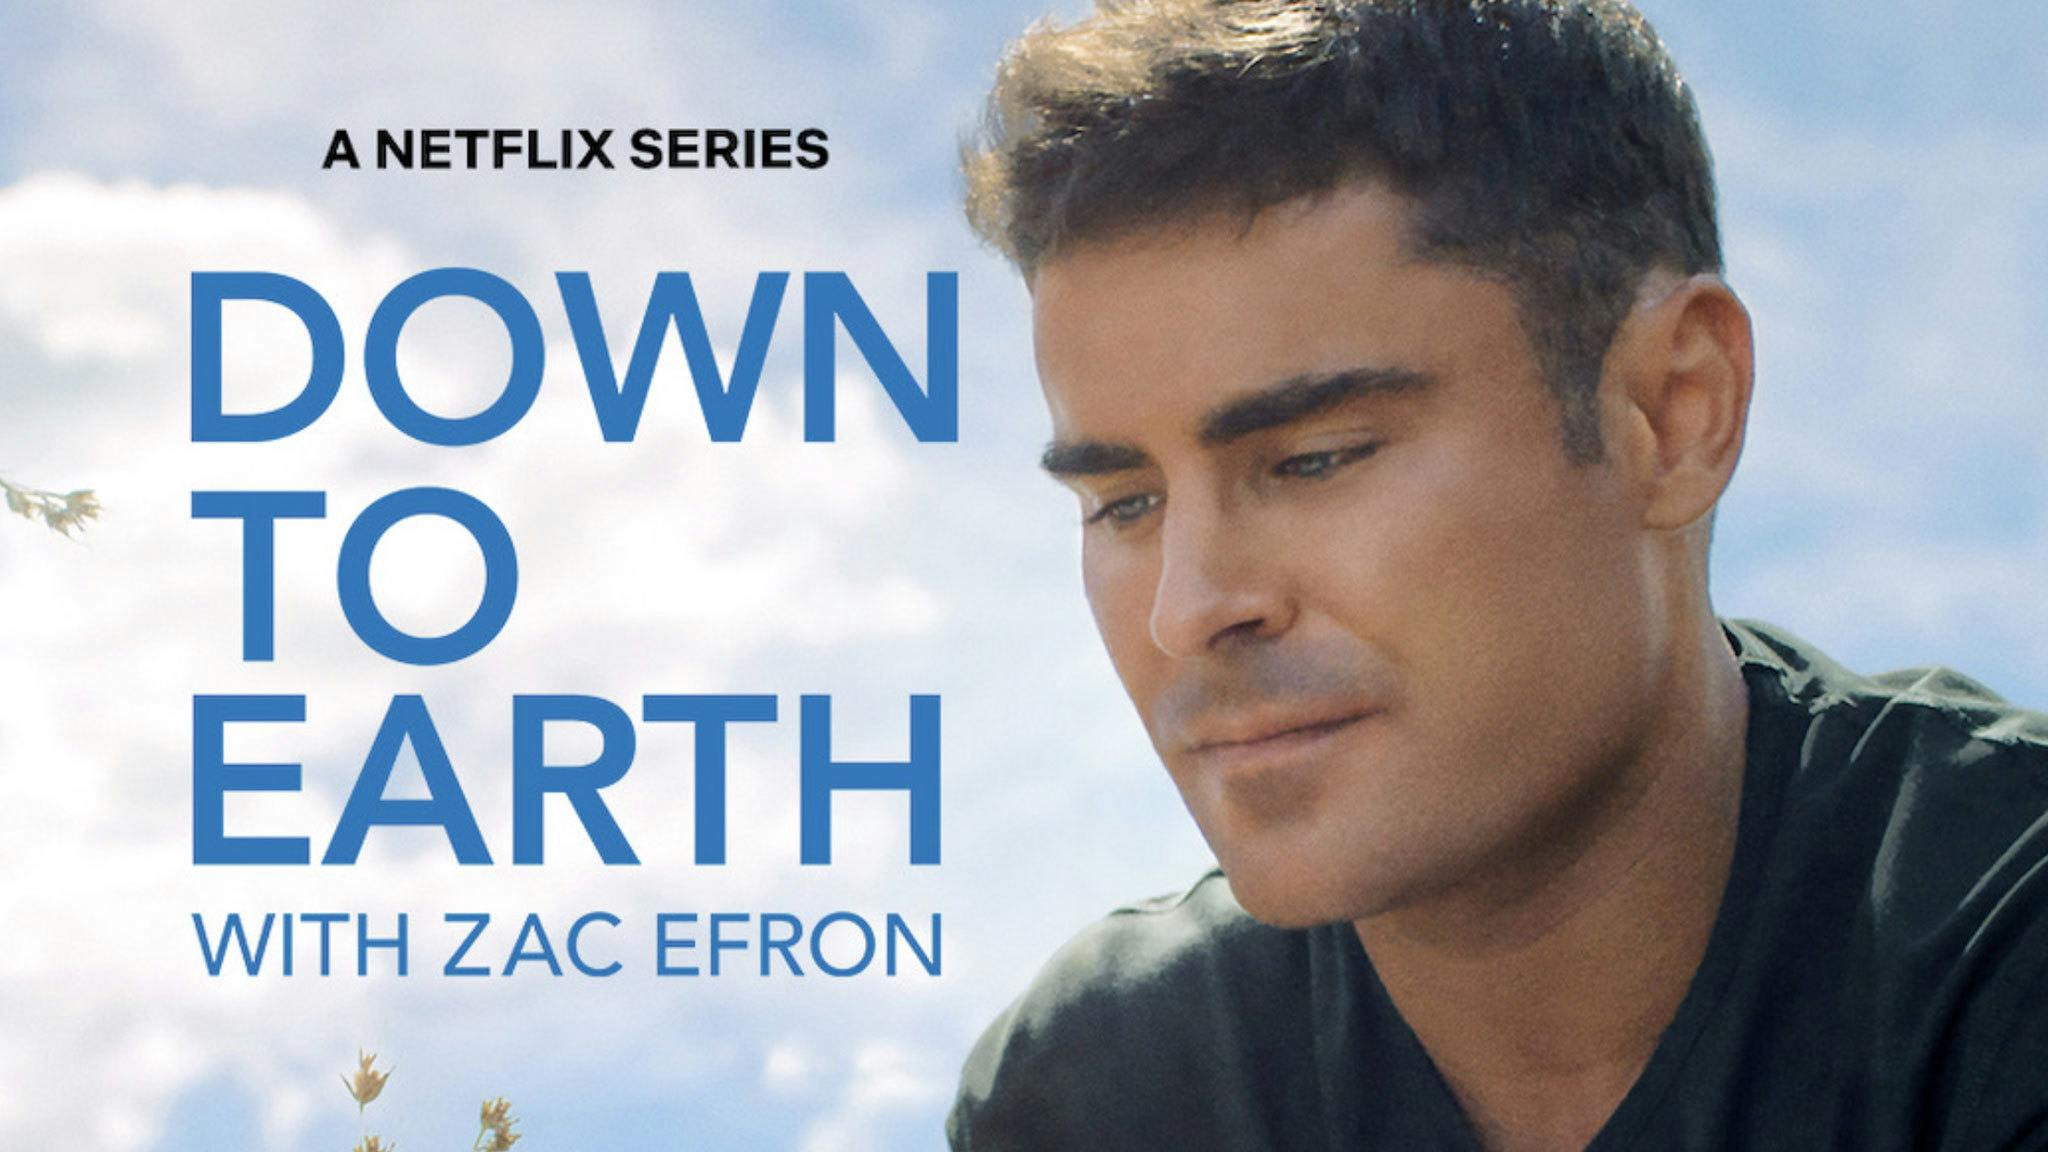 Serj Tankian composed the music for Netflix’s Down To Earth With Zac Efron